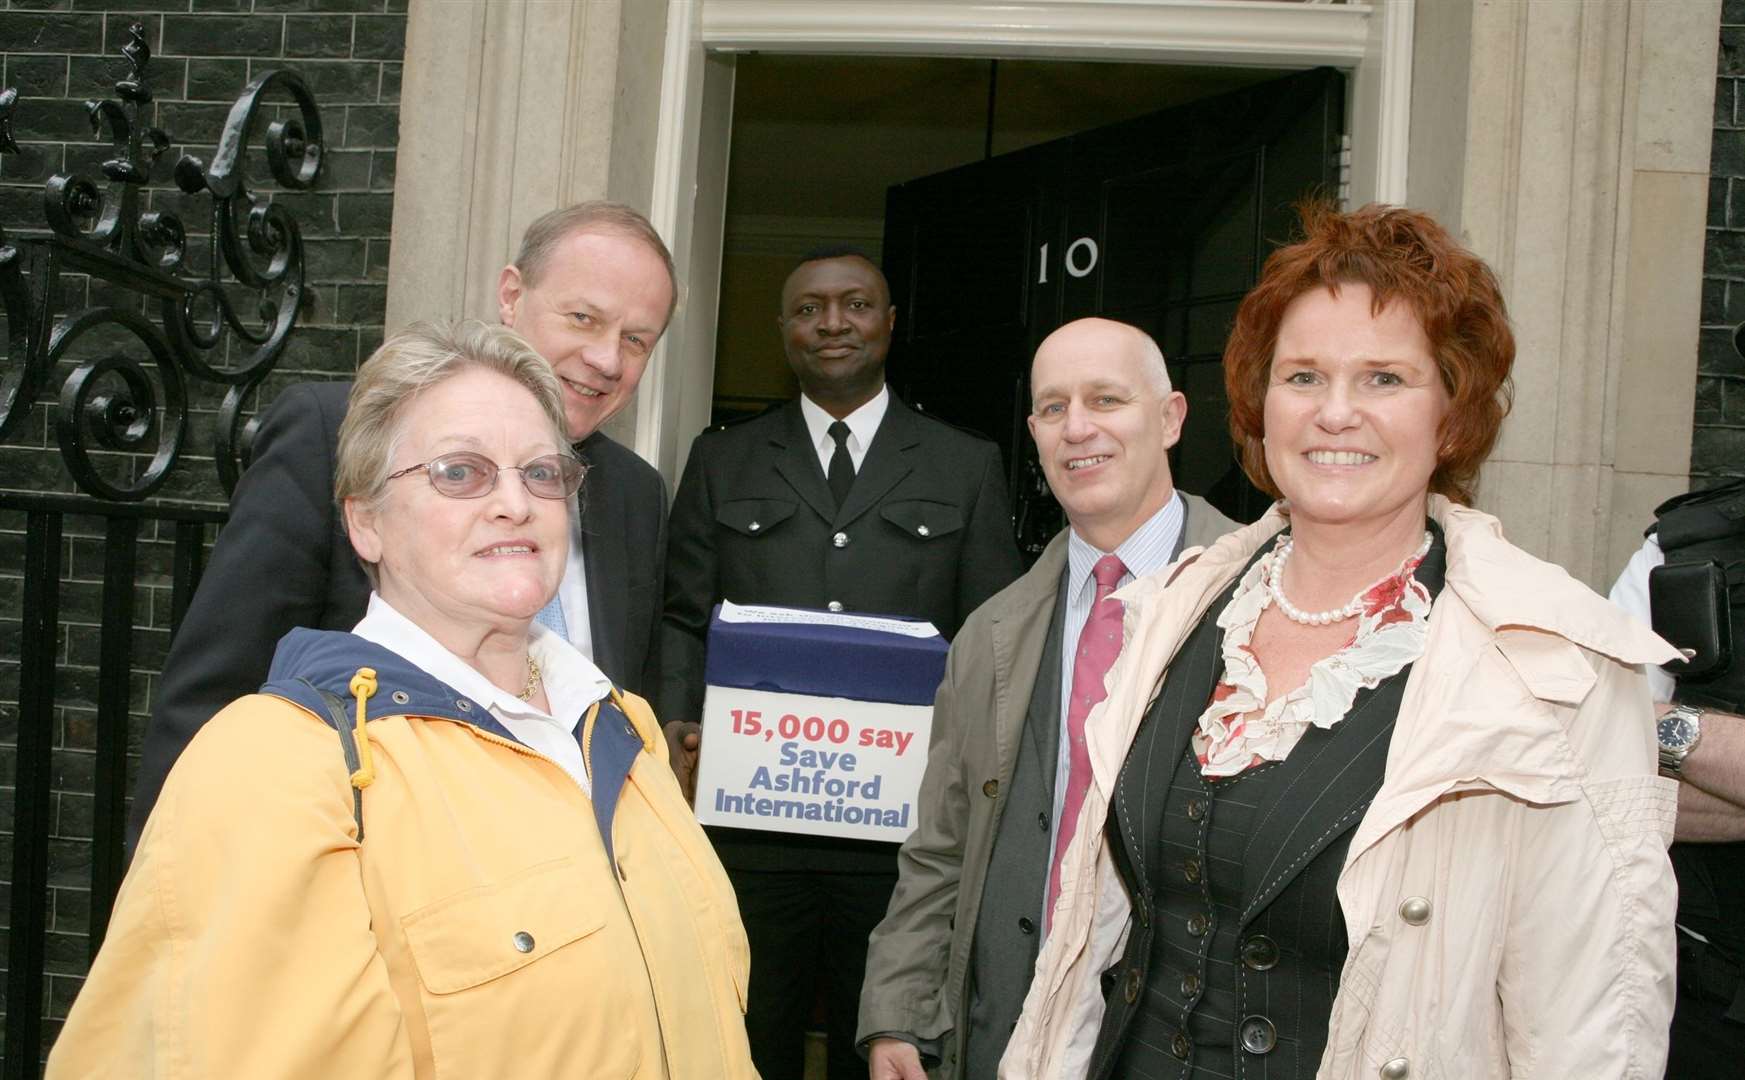 In 2007, a 15,000-signature petition protesting against Eurostar cuts to the Ashford International station services was handed in at 10 Downing Street by, left to right, Edith Robson, Ashford MP Damian Green, and Kent MEPs Peter Skinner and Sharon Bowles